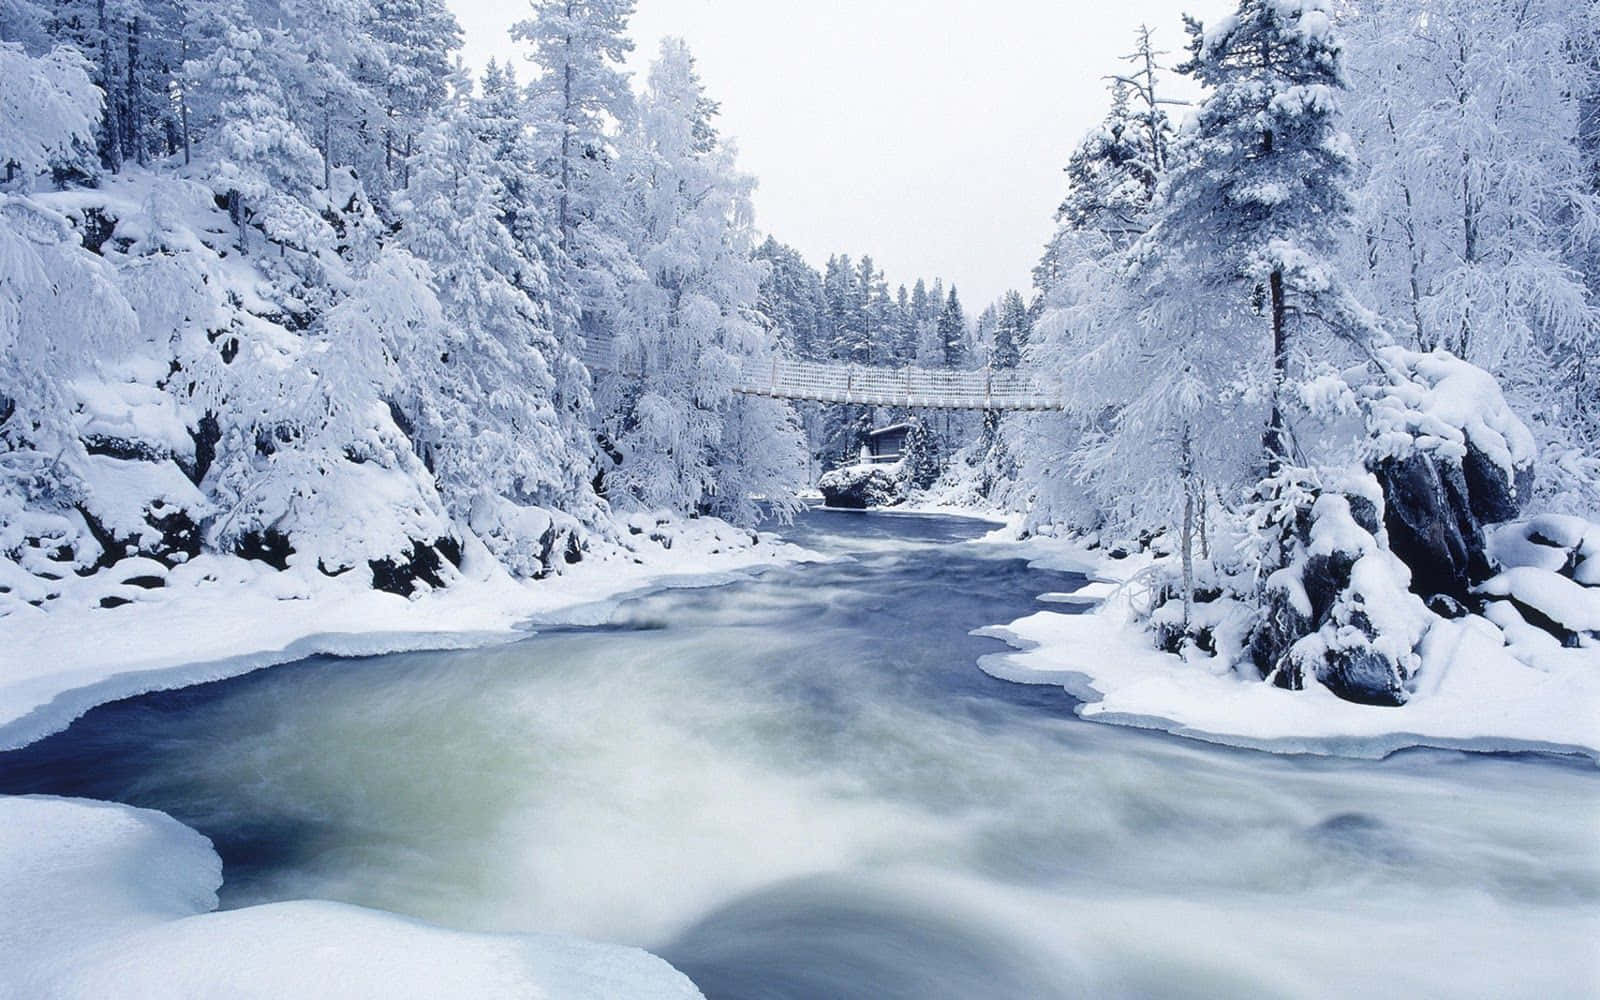 A Snow Covered River With A Bridge